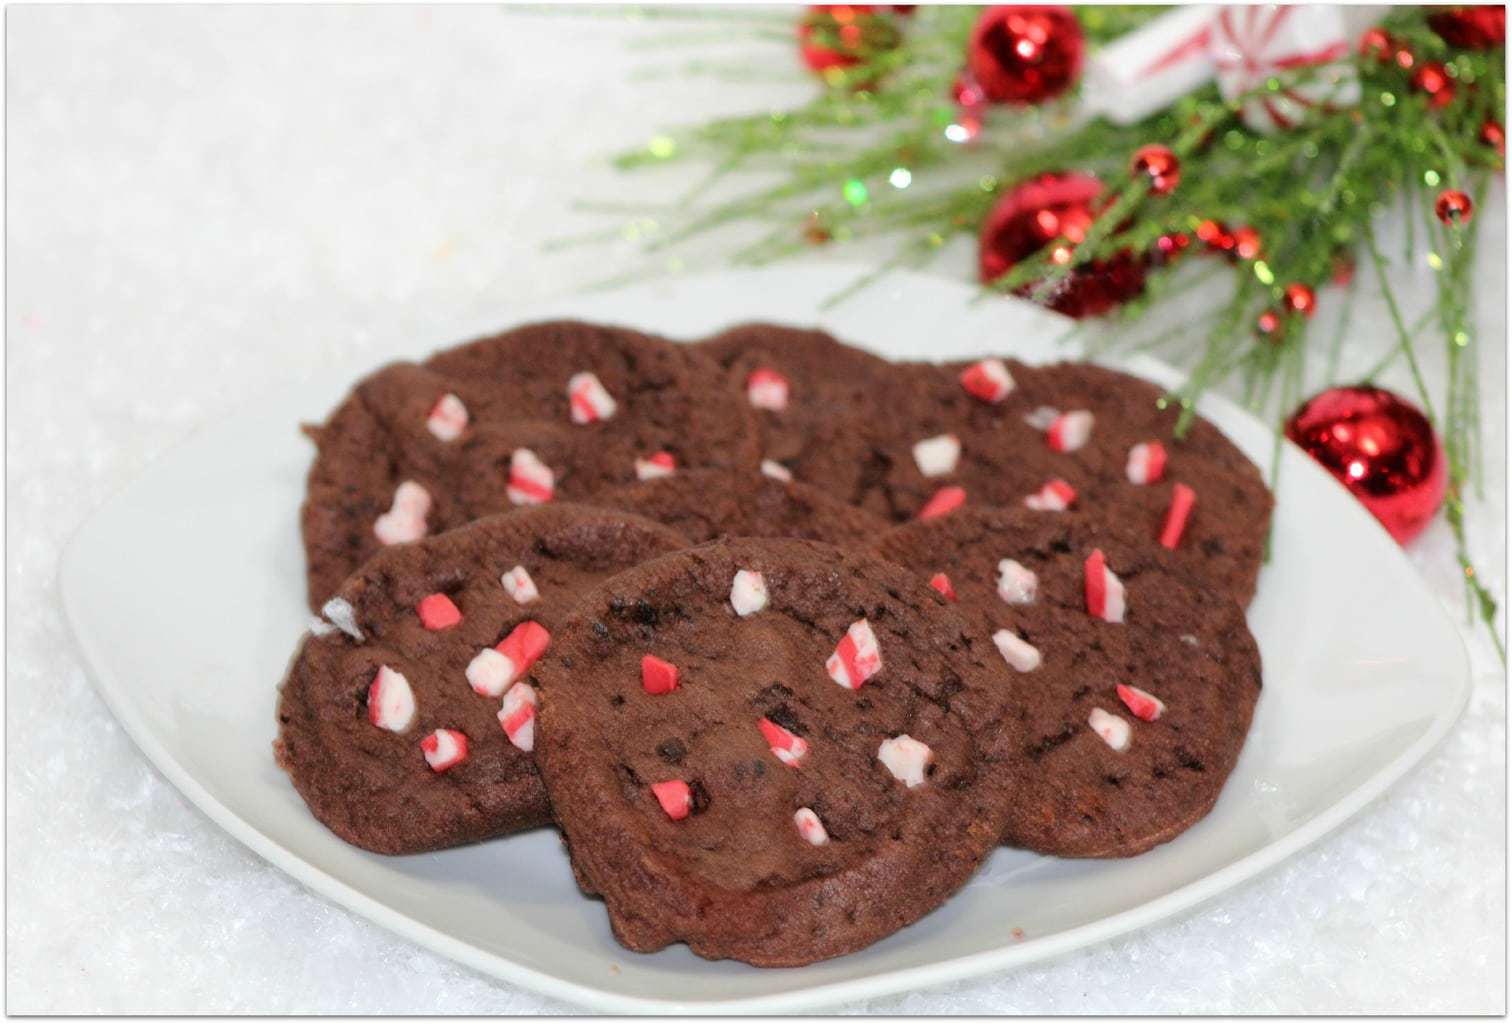 Chocolate cookies with candy cane pieces on a white plate with Christmas decor.